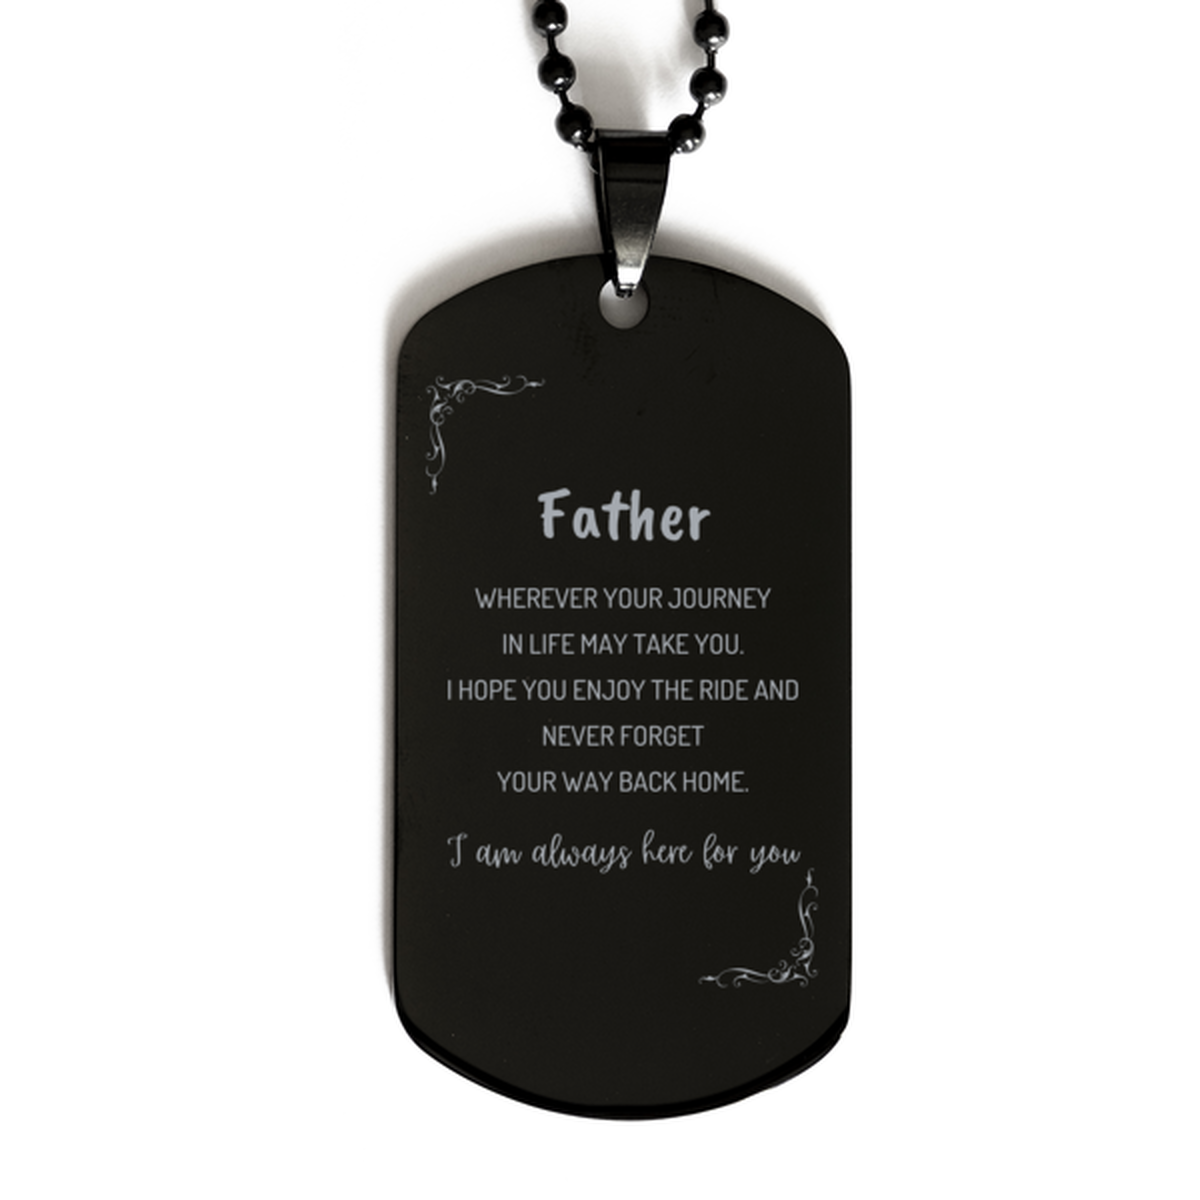 Father wherever your journey in life may take you, I am always here for you Father Black Dog Tag, Awesome Christmas Gifts For Father, Father Birthday Gifts for Men Women Family Loved One